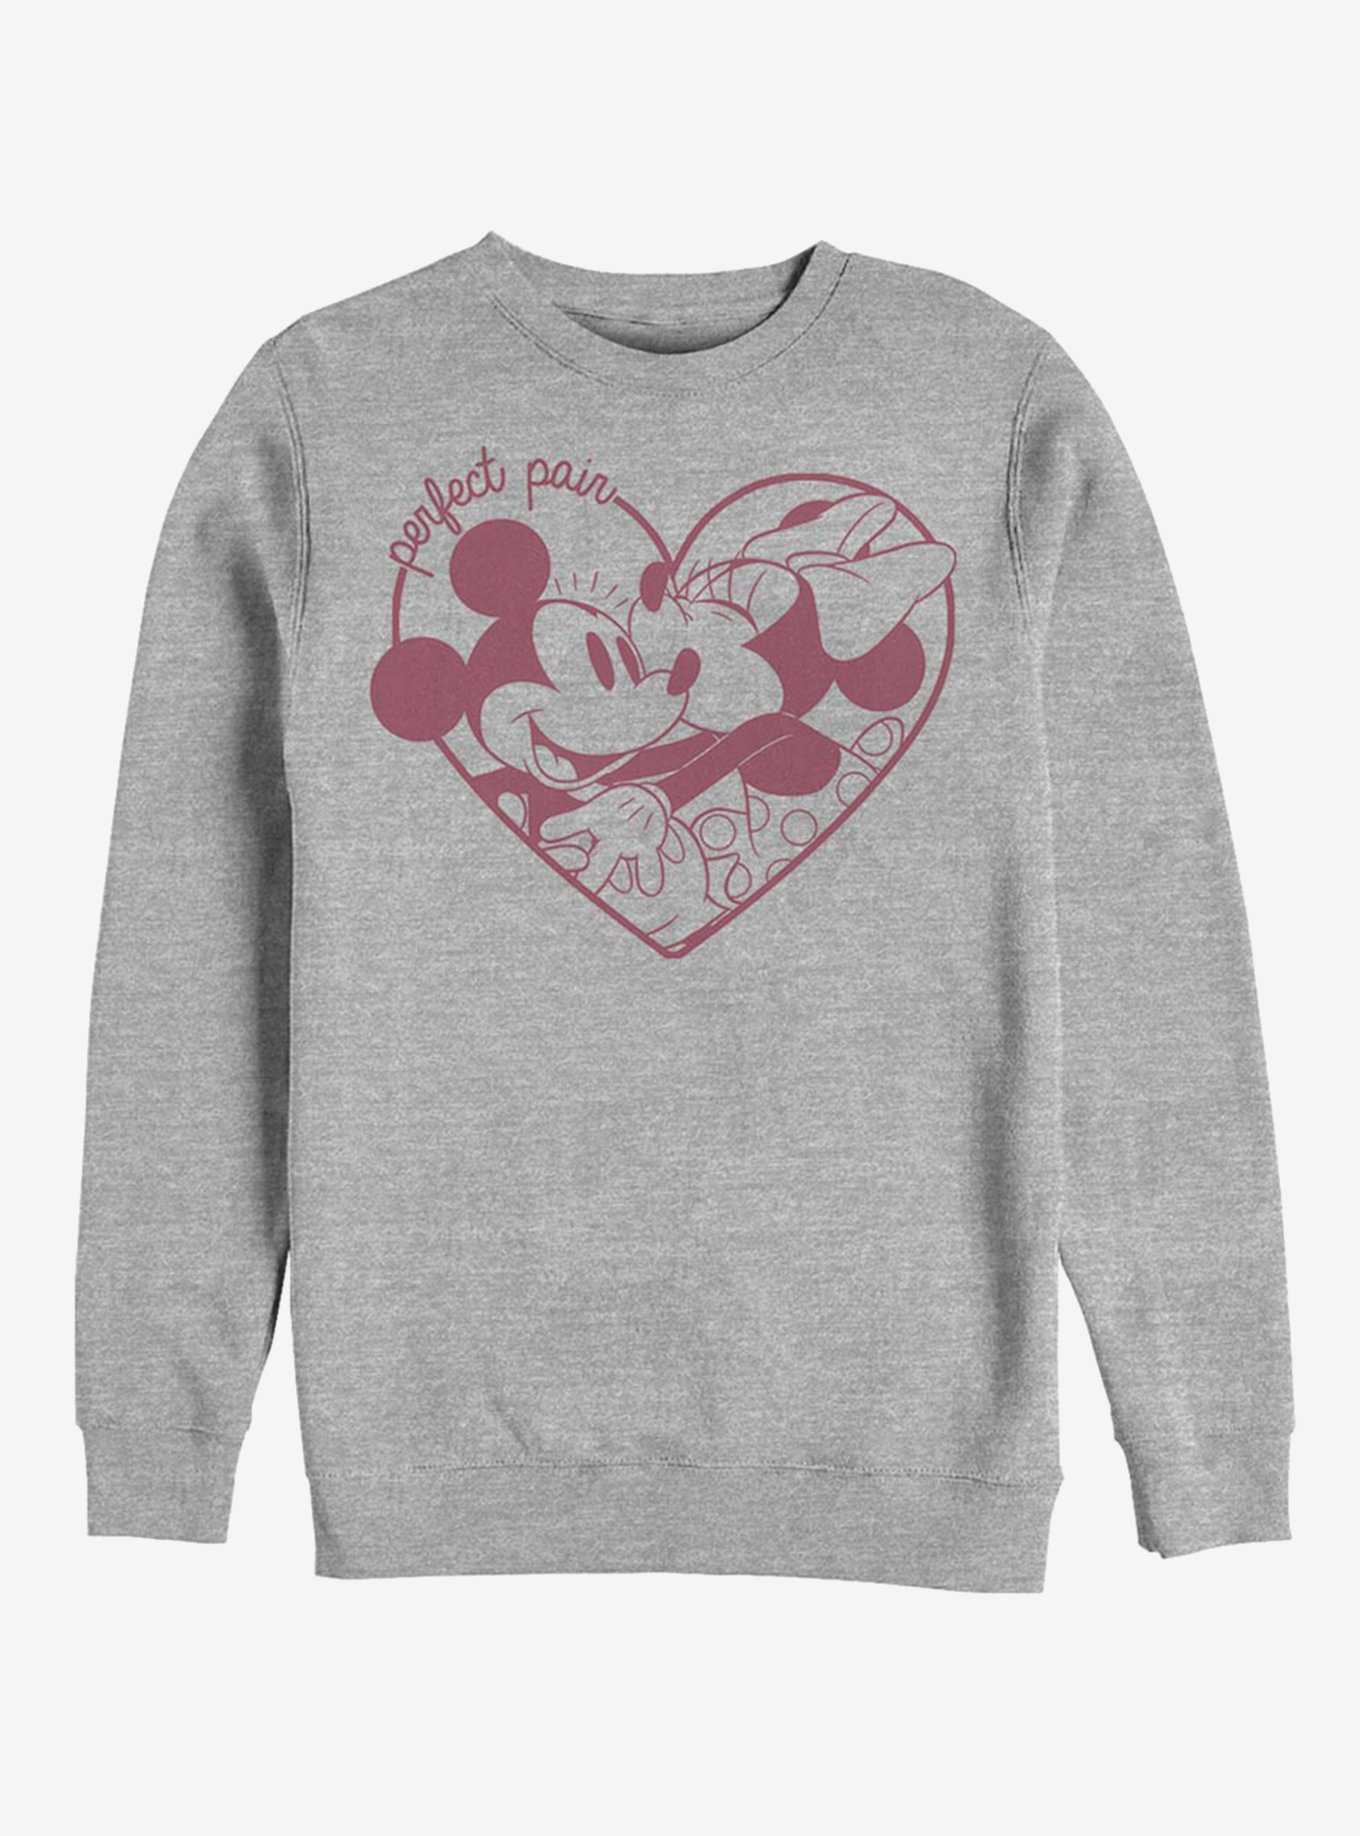 Disney Mickey Mouse & Minnie Mouse Perfect Pair Sweatshirt, , hi-res